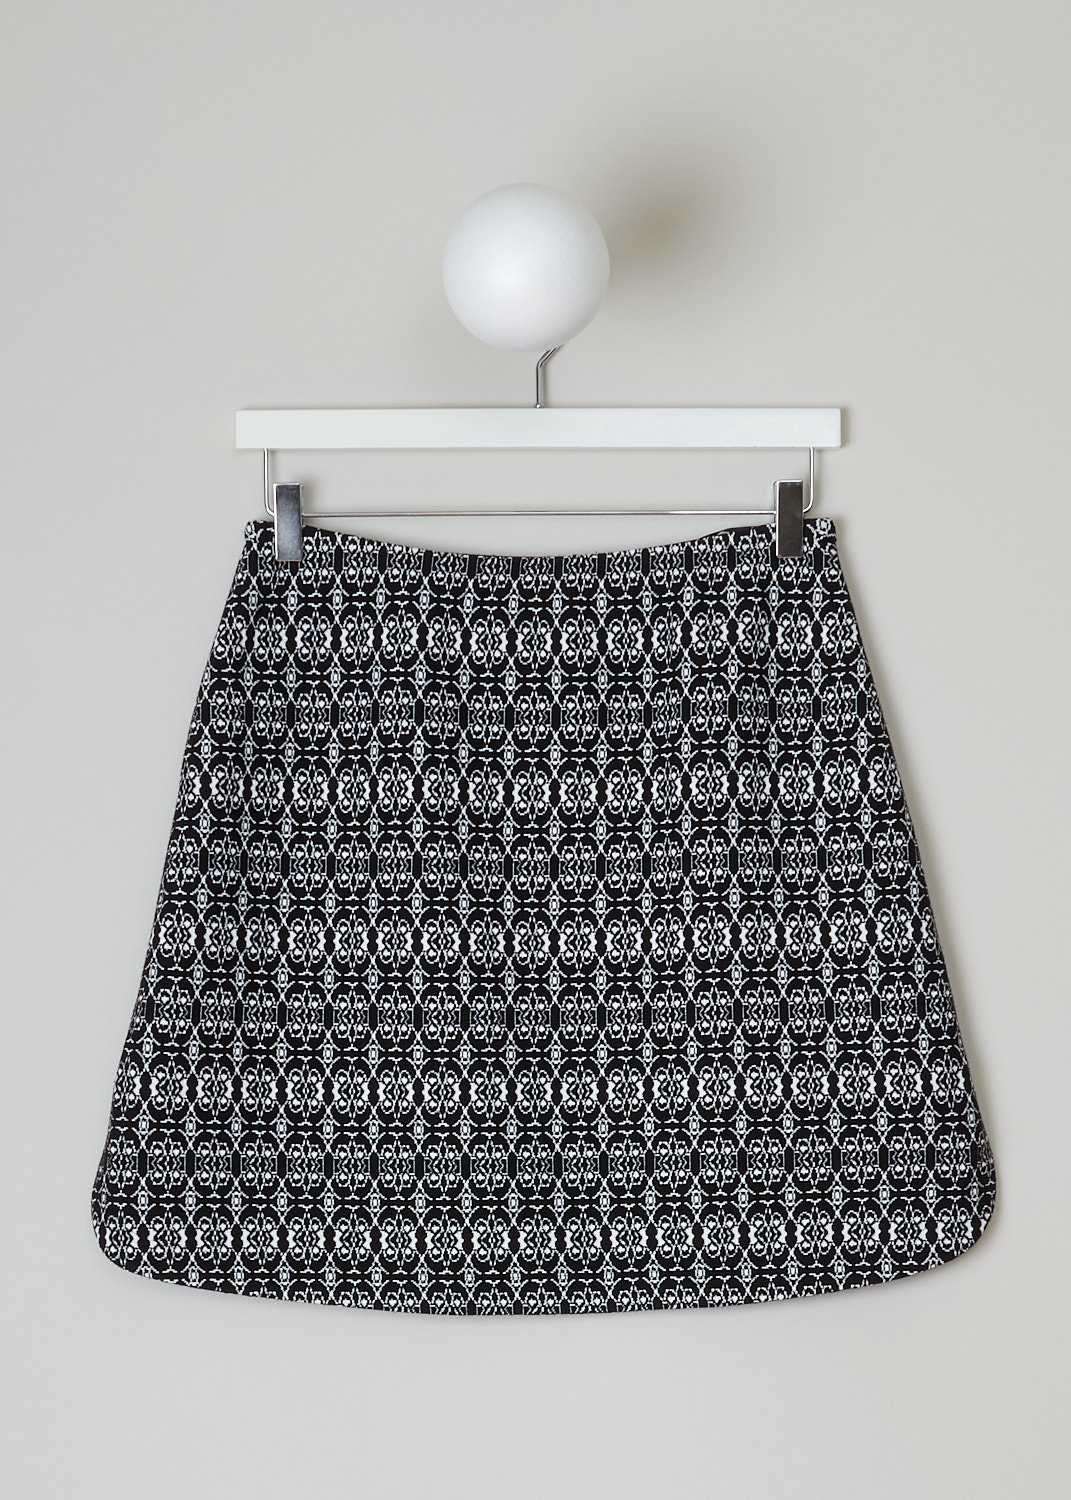 ALAÏA, BLACK AND WHITE PRINTED SKIRT, 8W9JD82CM408_JUPE_ALHAMBRA, Black, White, Print, Back, This black and white printed skirt is fully elasticated. A concealed side zip functions as the closure option. The skirt has a curved hemline with small slits.
